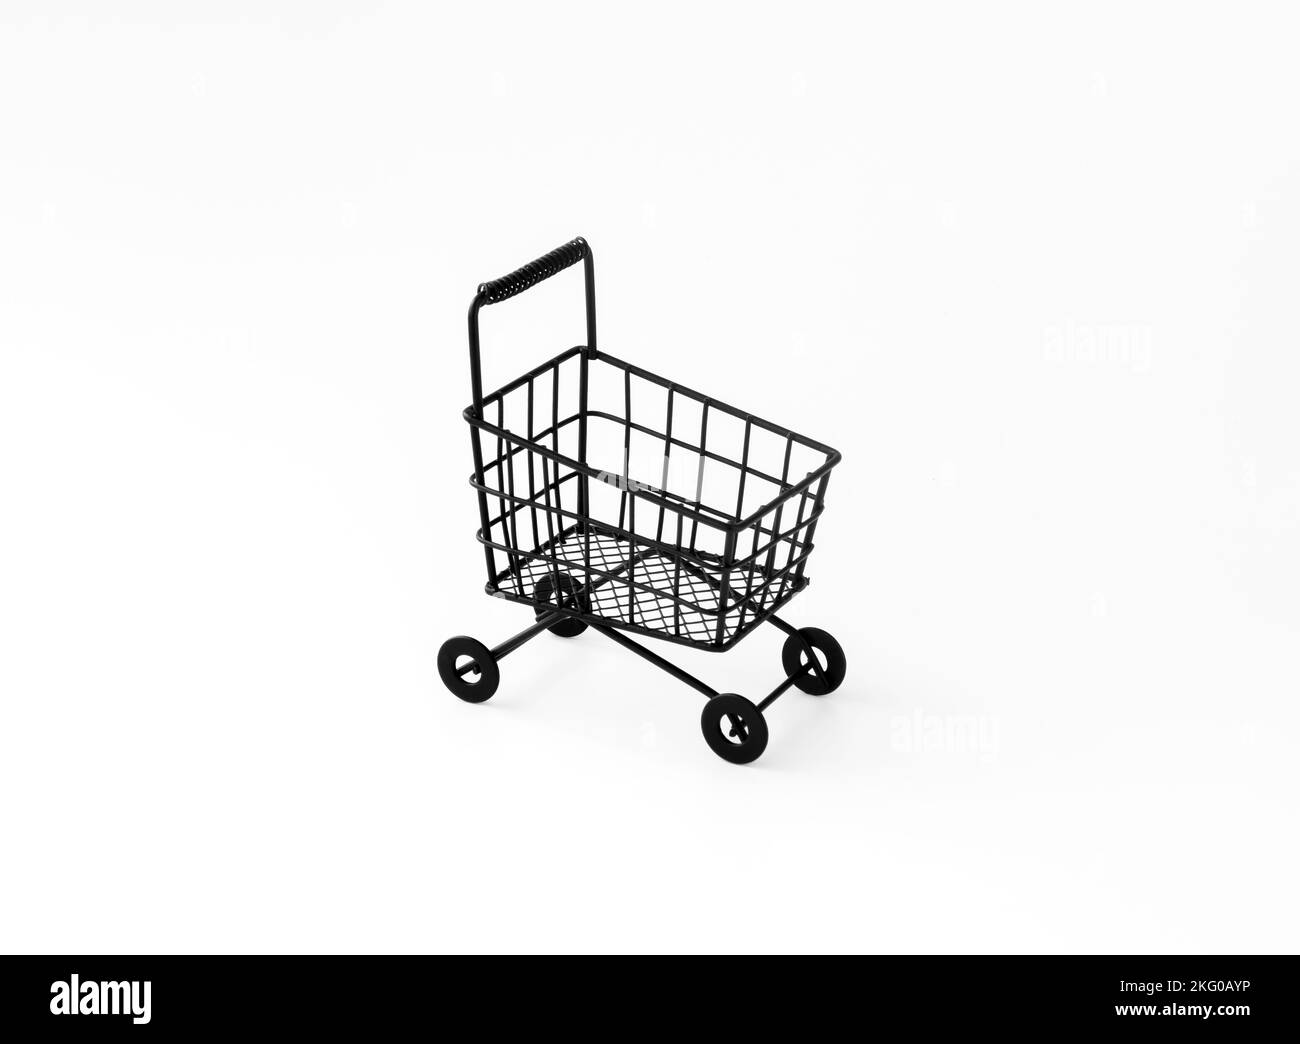 Black Friday, sale offer, shopping online business and e-commerce concepts. Black shopping trolley cart supermarket isolated on white background. Stock Photo